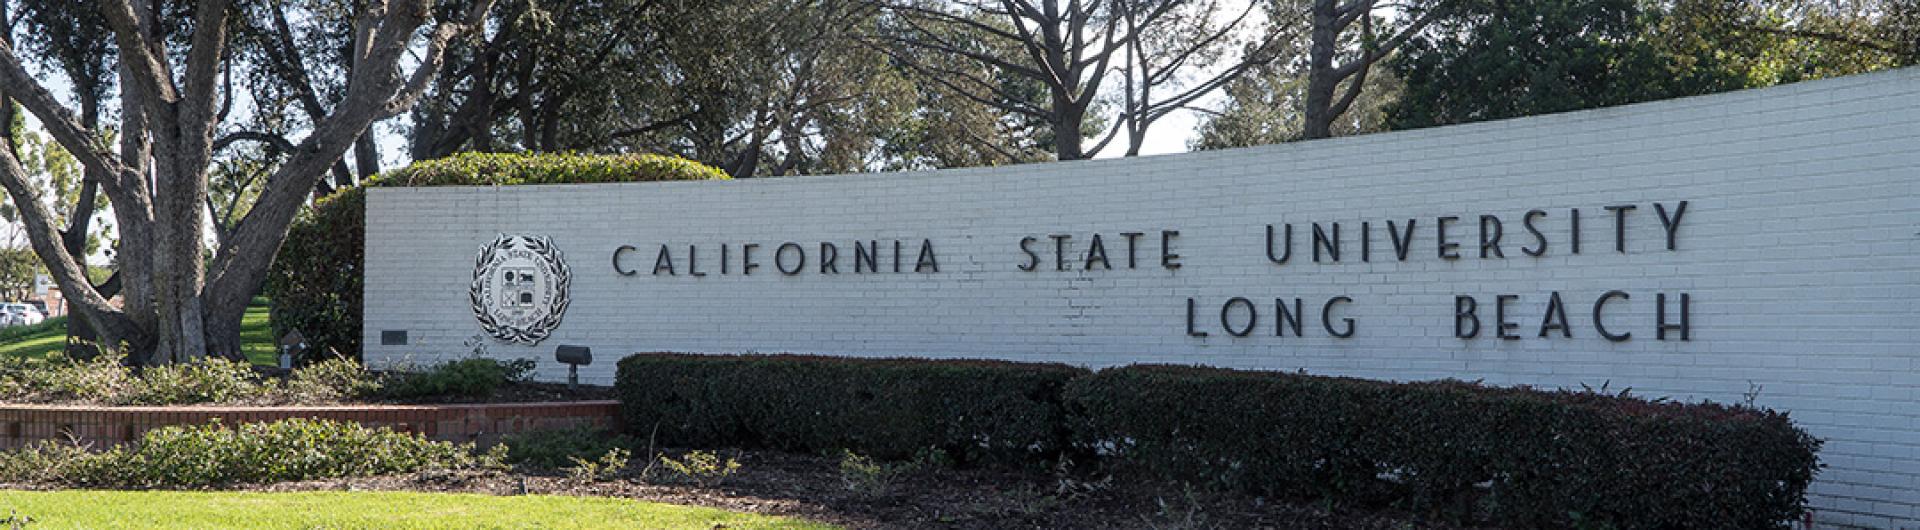 A sign at an entrance to Long Beach State University